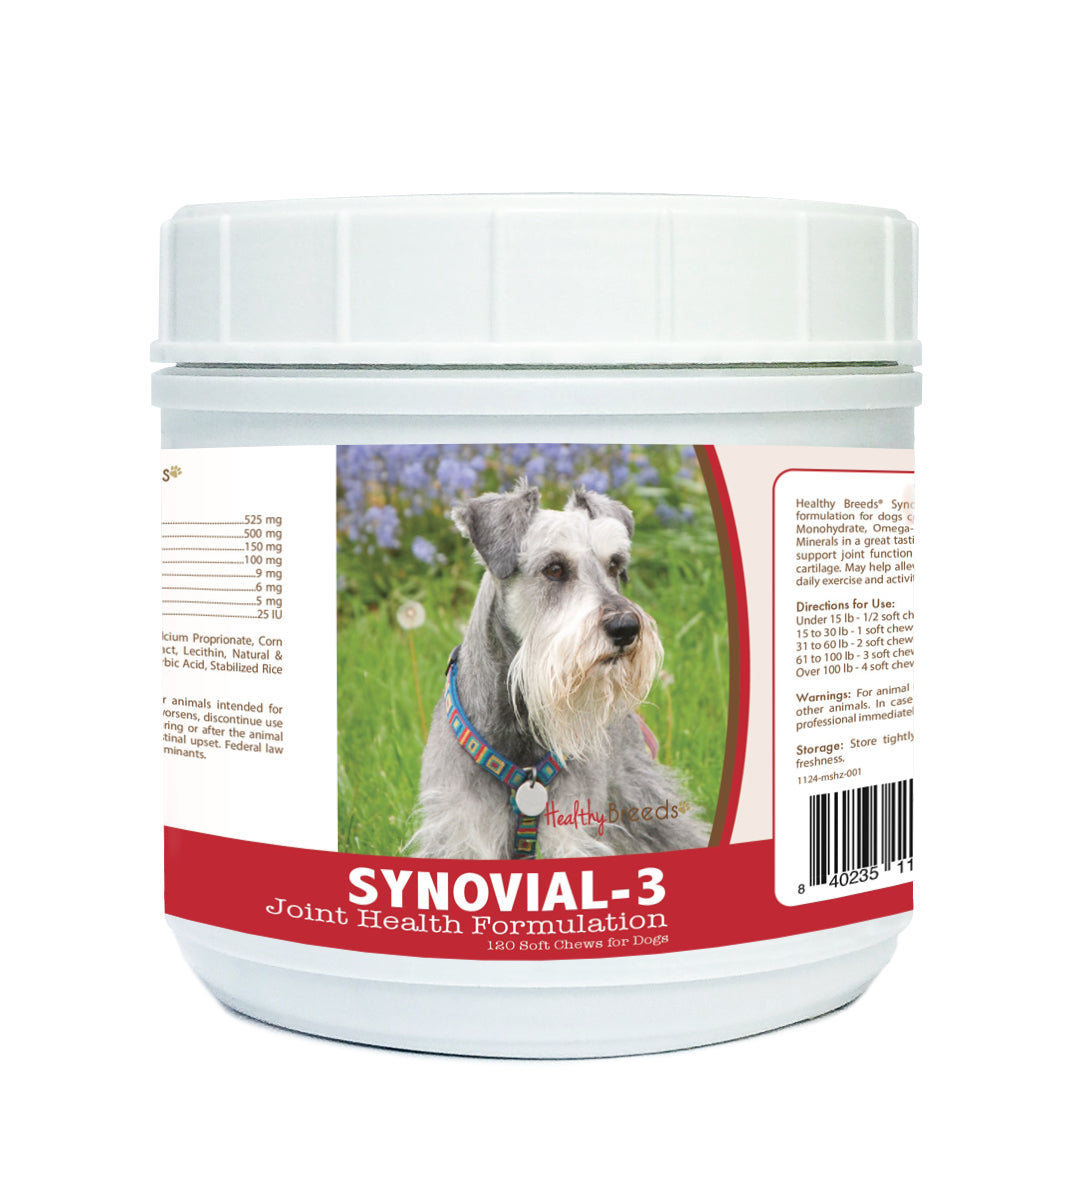 Miniature Schnauzer Synovial-3 Joint Health Formulation Soft Chews 120 Count